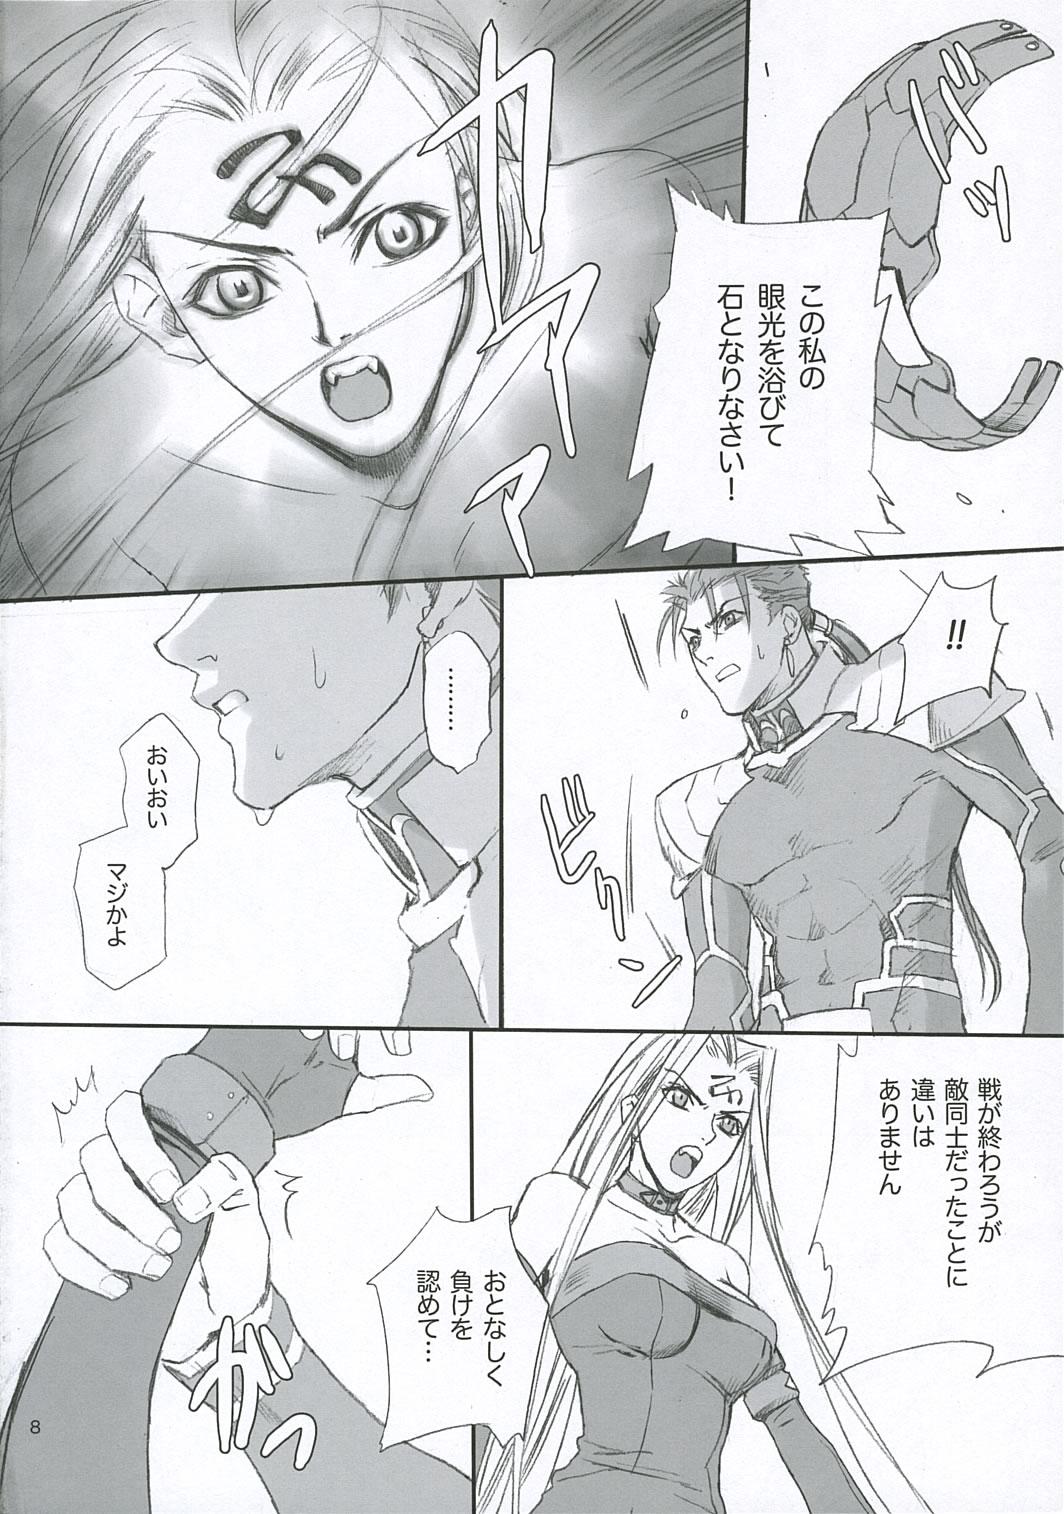 Celeb Lancer Evolution - Fate stay night Mmf - Page 7